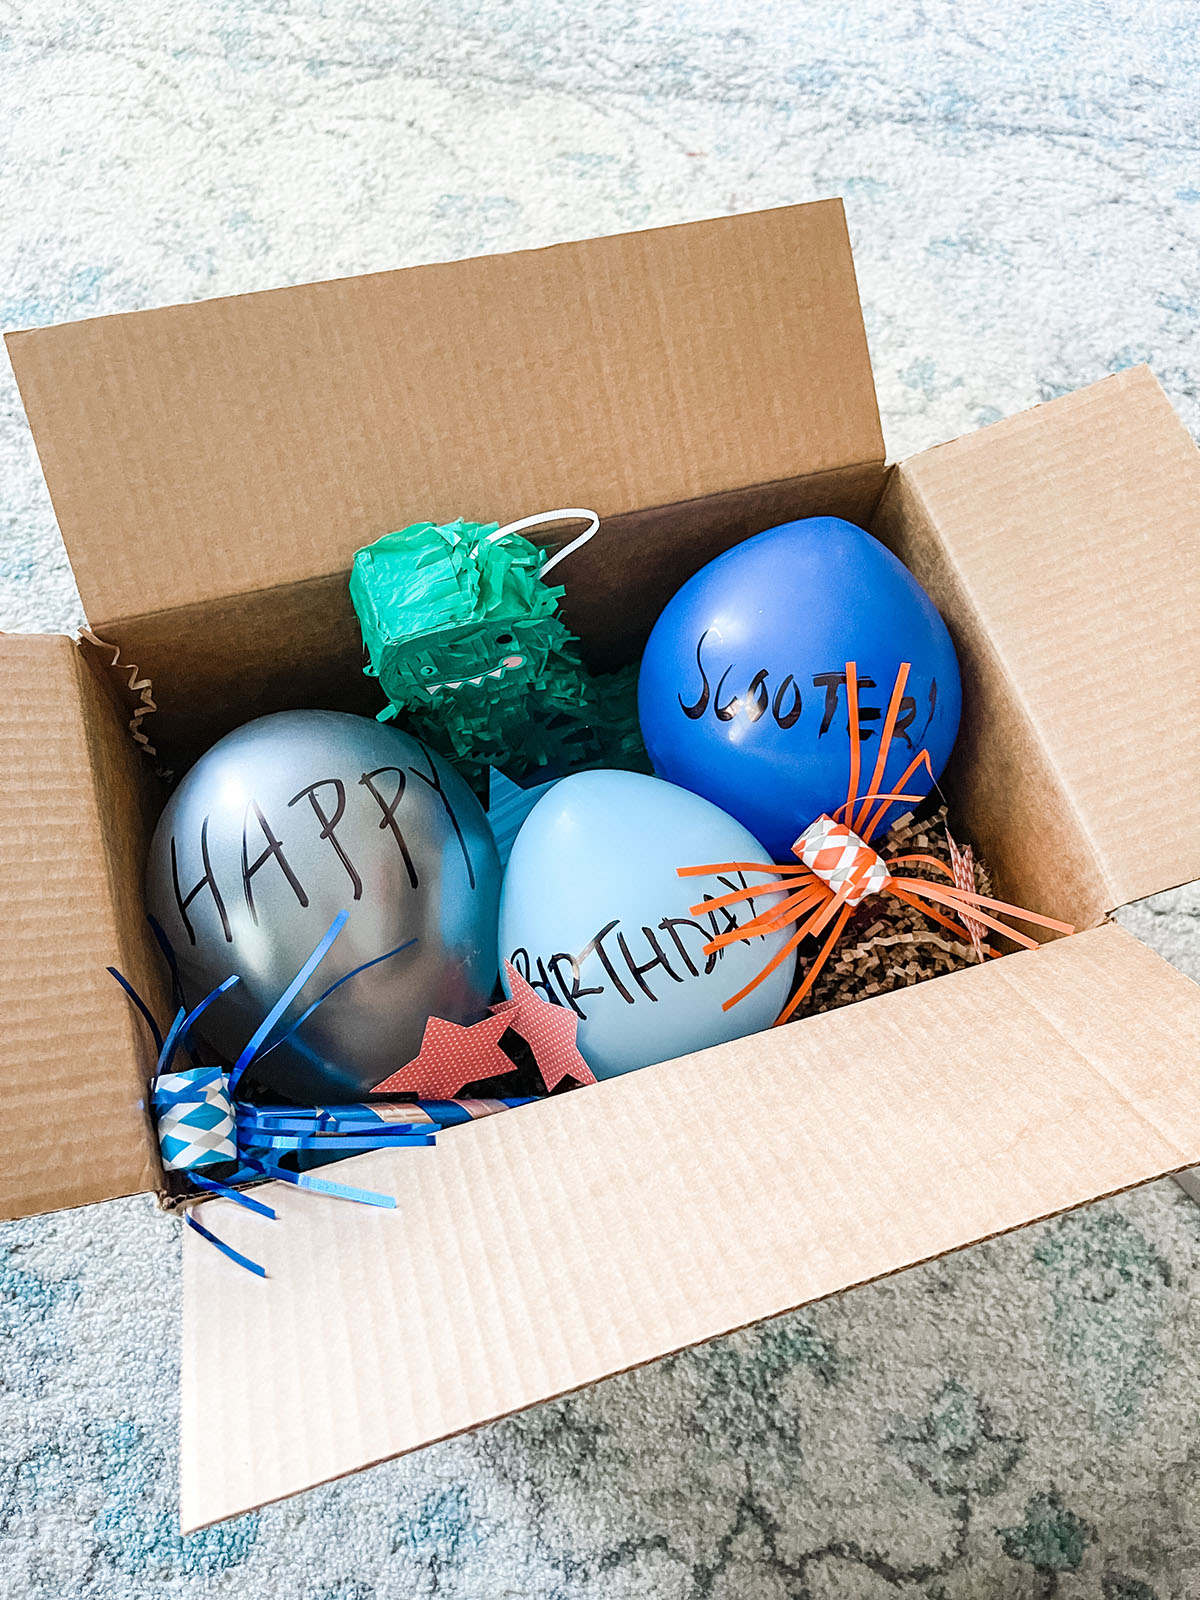 Brown box filled with birthday decorations, dinosaur pinata, blue balloons, and party blowers sitting on a blue and white rug.